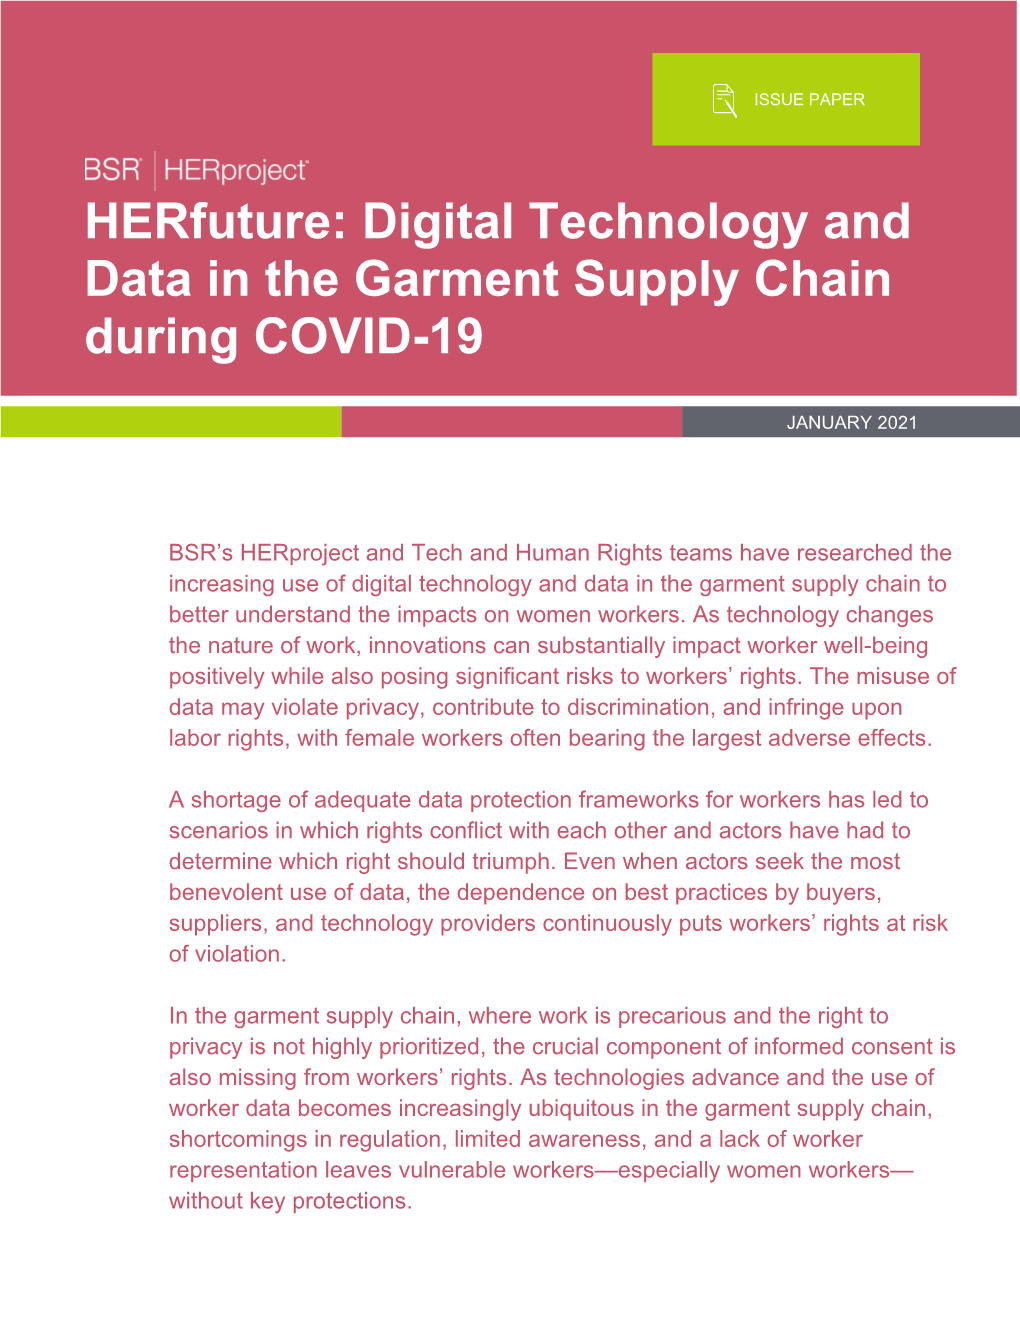 Herfuture: Digital Technology and Data in the Garment Supply Chain During COVID-19